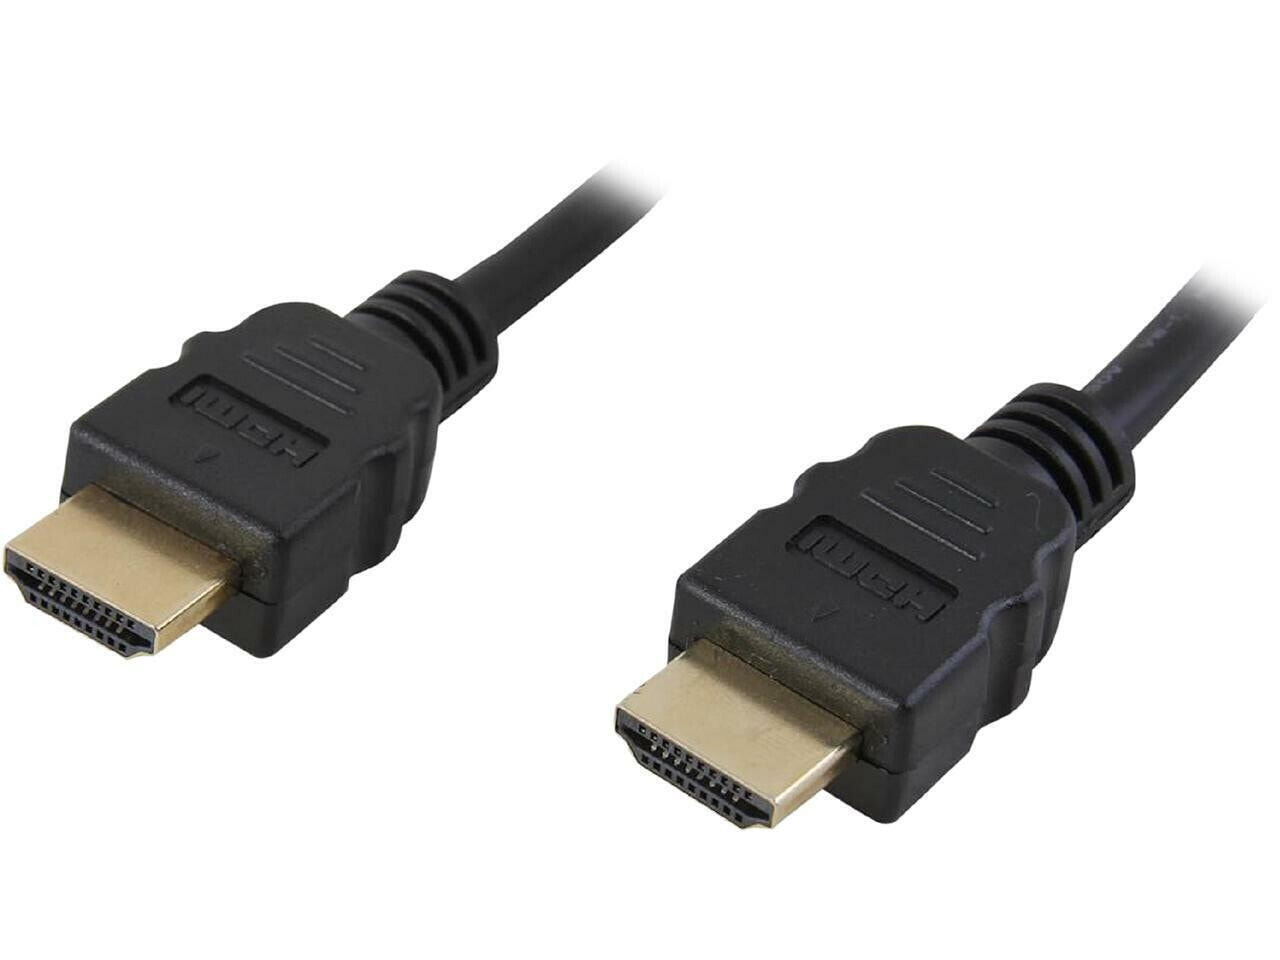 Nippon Labs HDMI-HS-6-2P 6 ft. HDMI 2.0 Cable, High-Speed HDTV Cable, Supports E